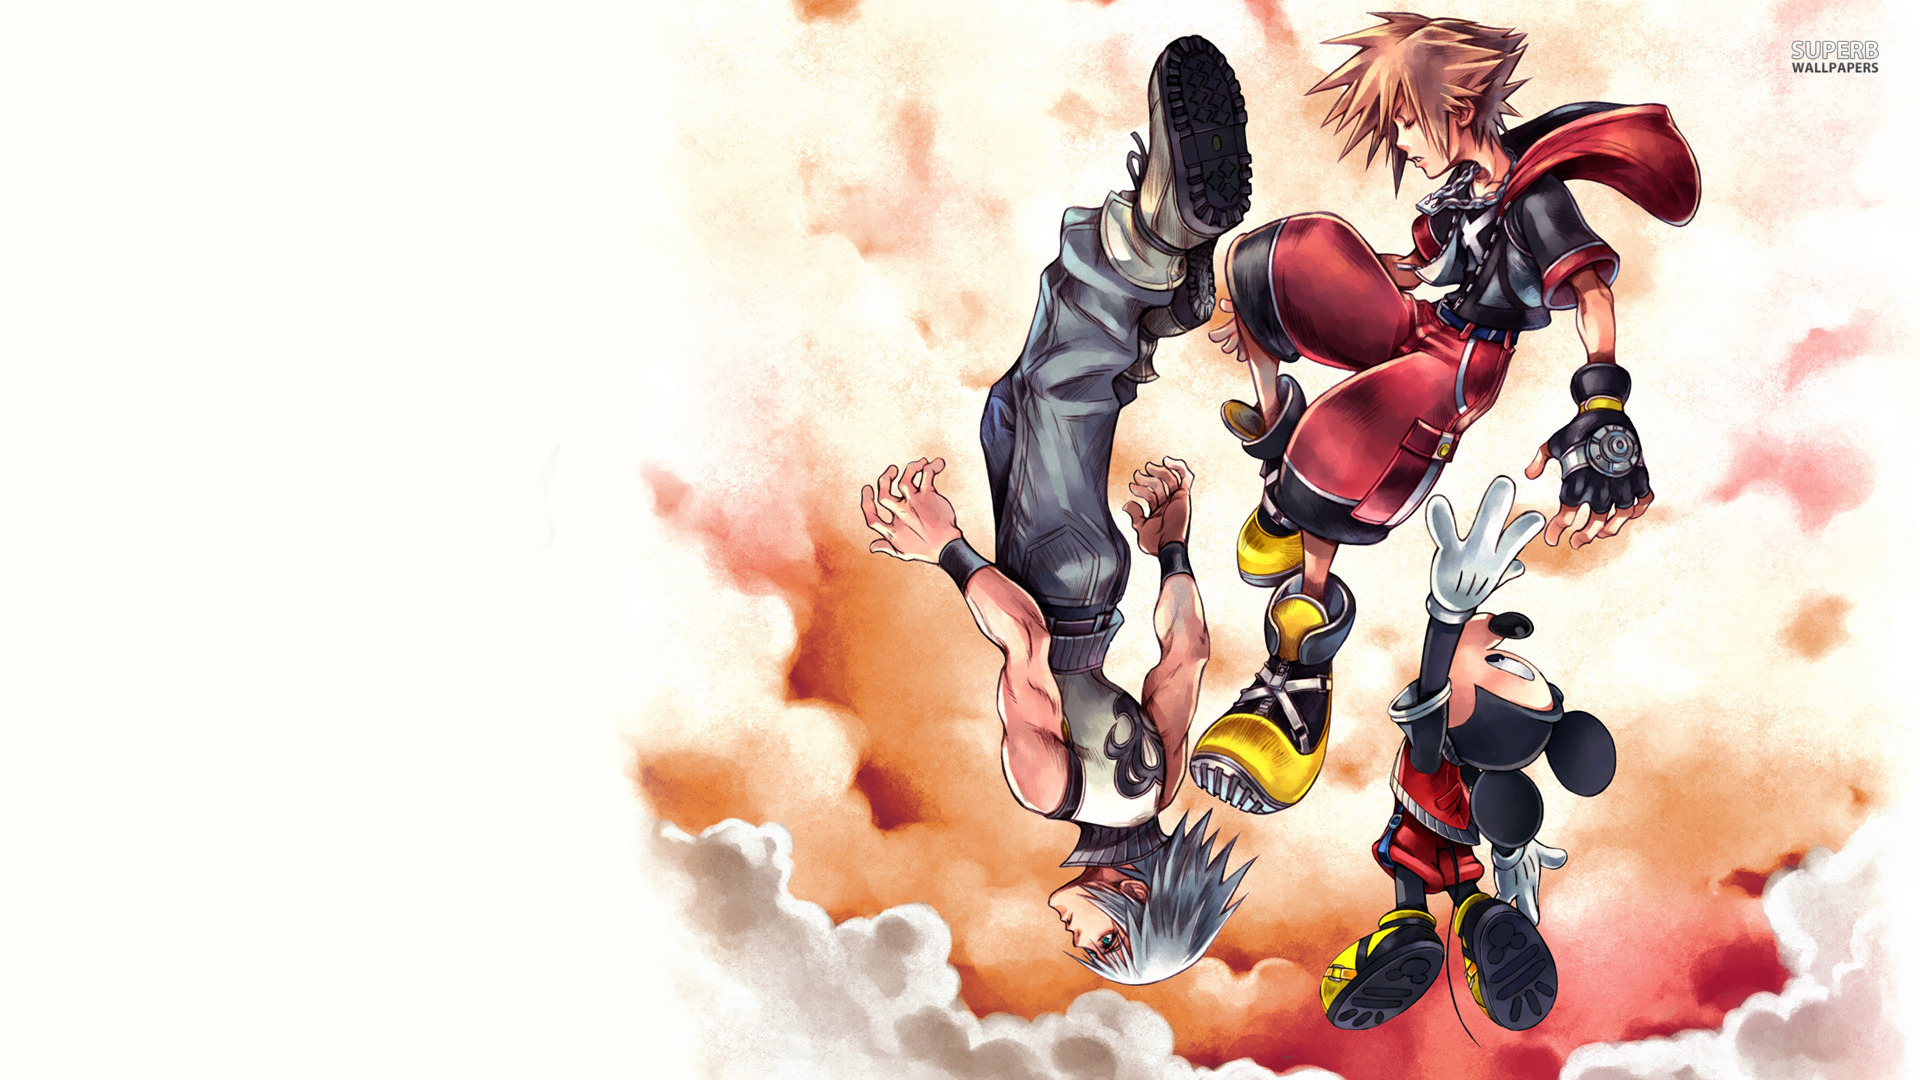 60+ Kingdom Hearts HD Wallpapers and Backgrounds